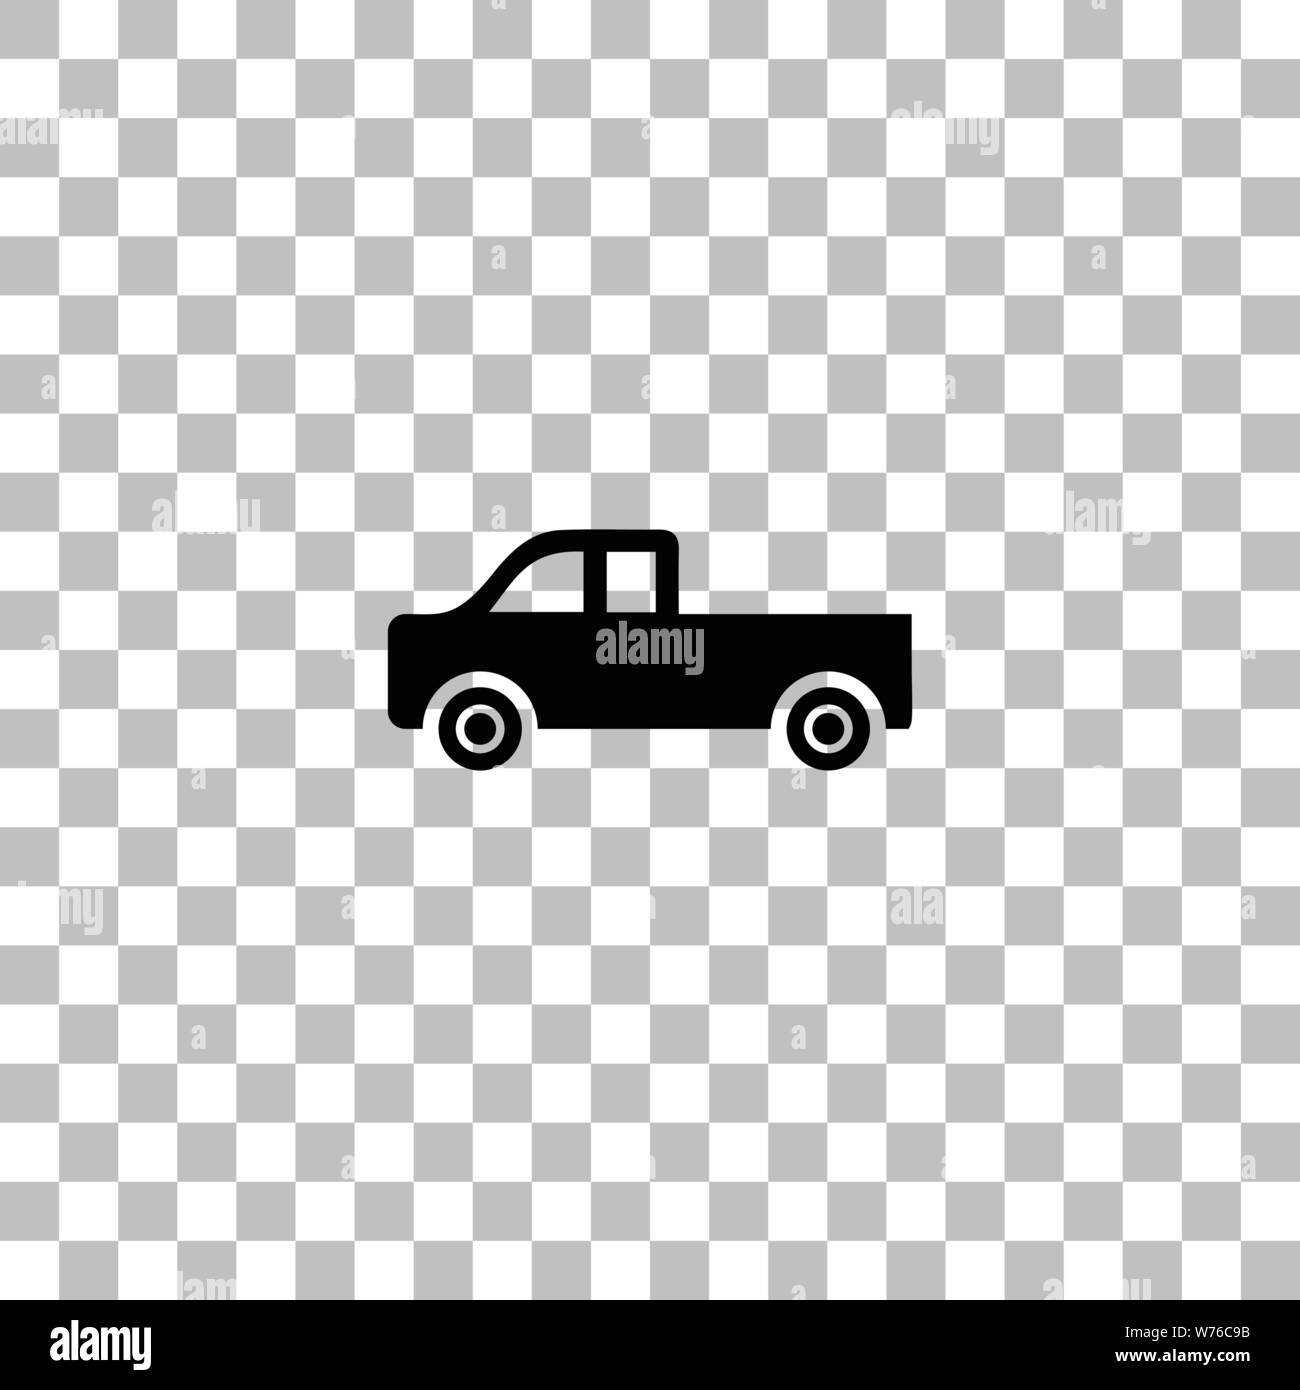 Pickup truck. Black flat icon on a transparent background. Pictogram for your project Stock Vector